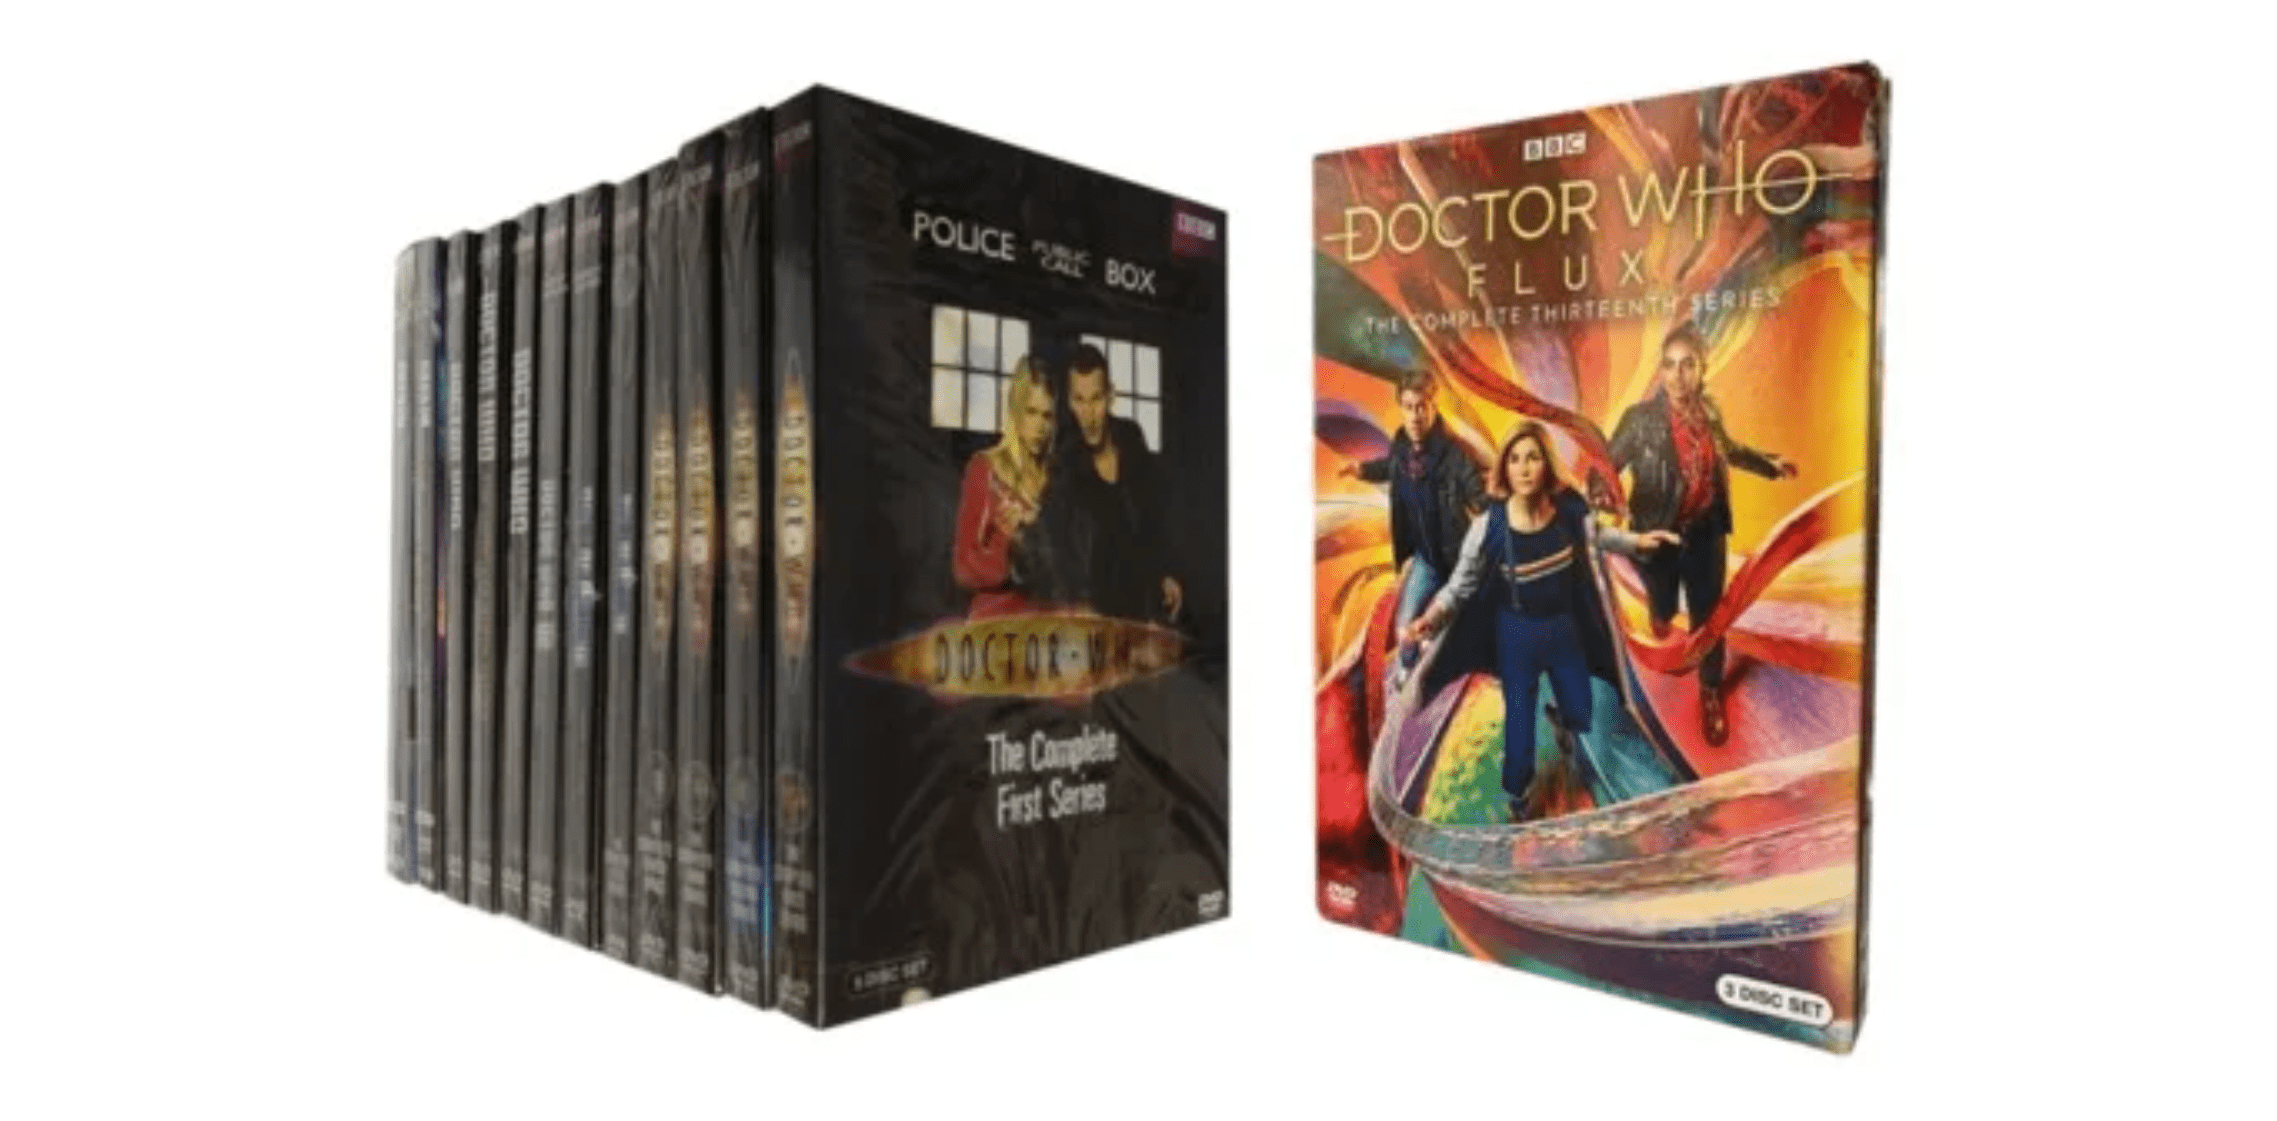 Doctor Who: The Complete Thirteenth Series - Flux [DVD]